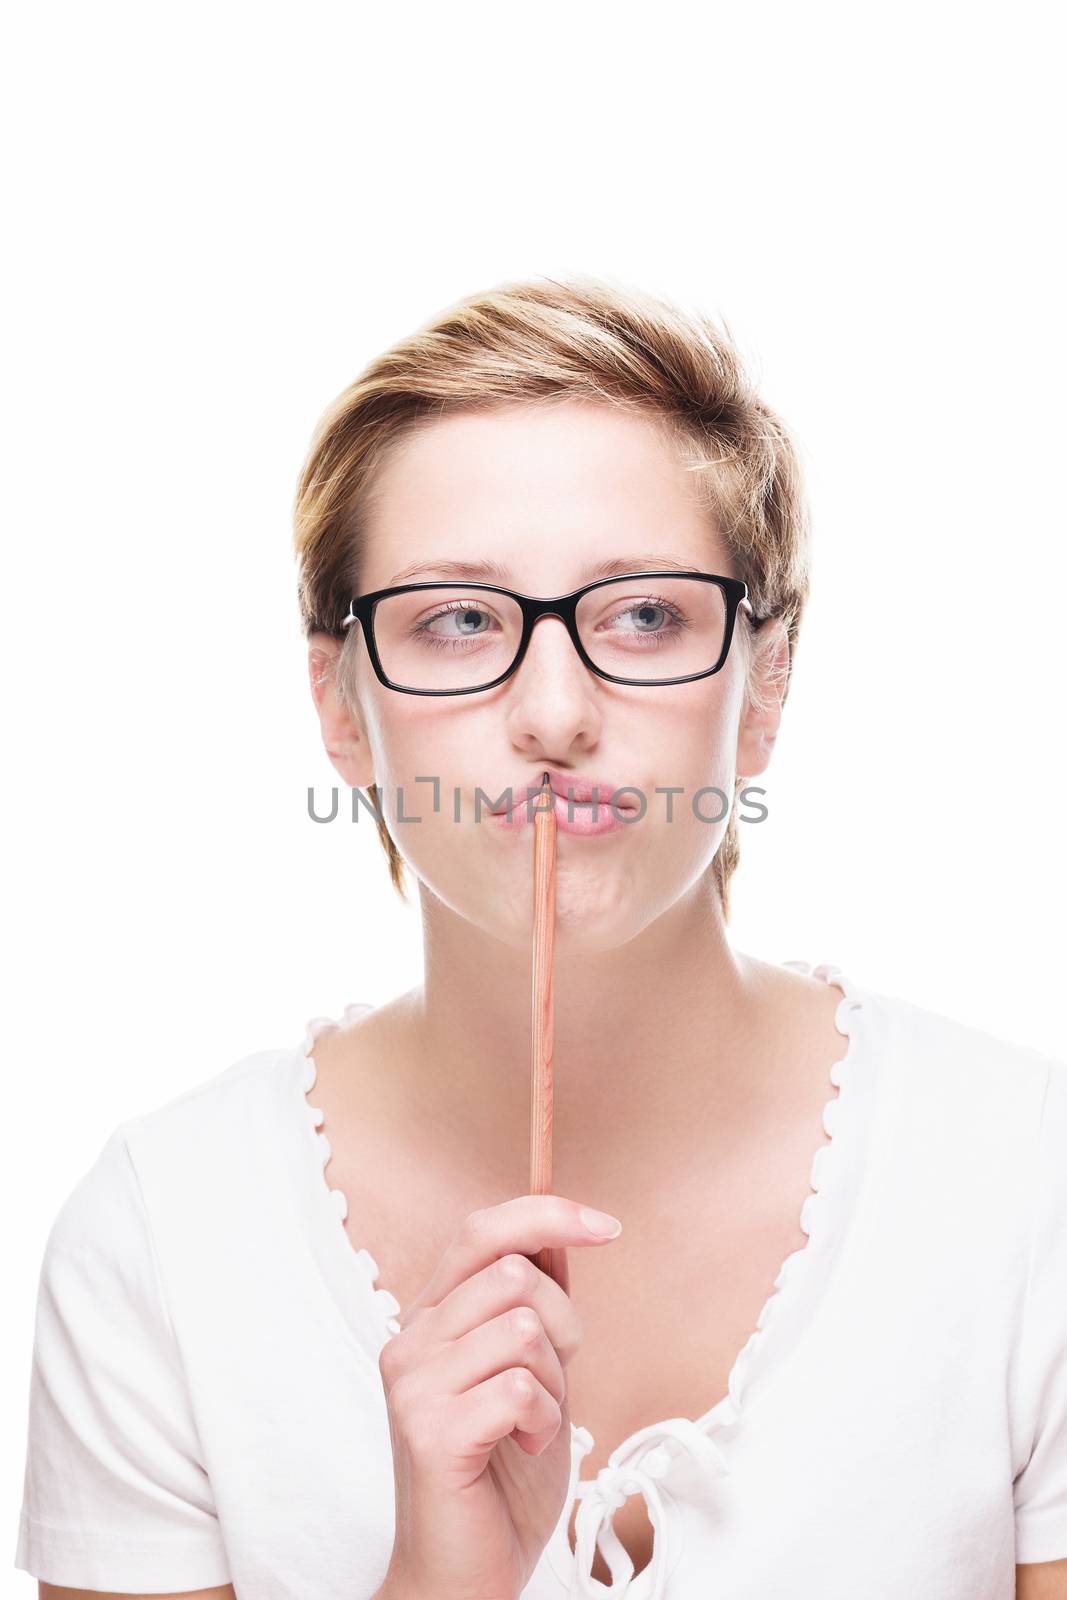 blonde woman is searching for ideas holding pencil to her lips on white background